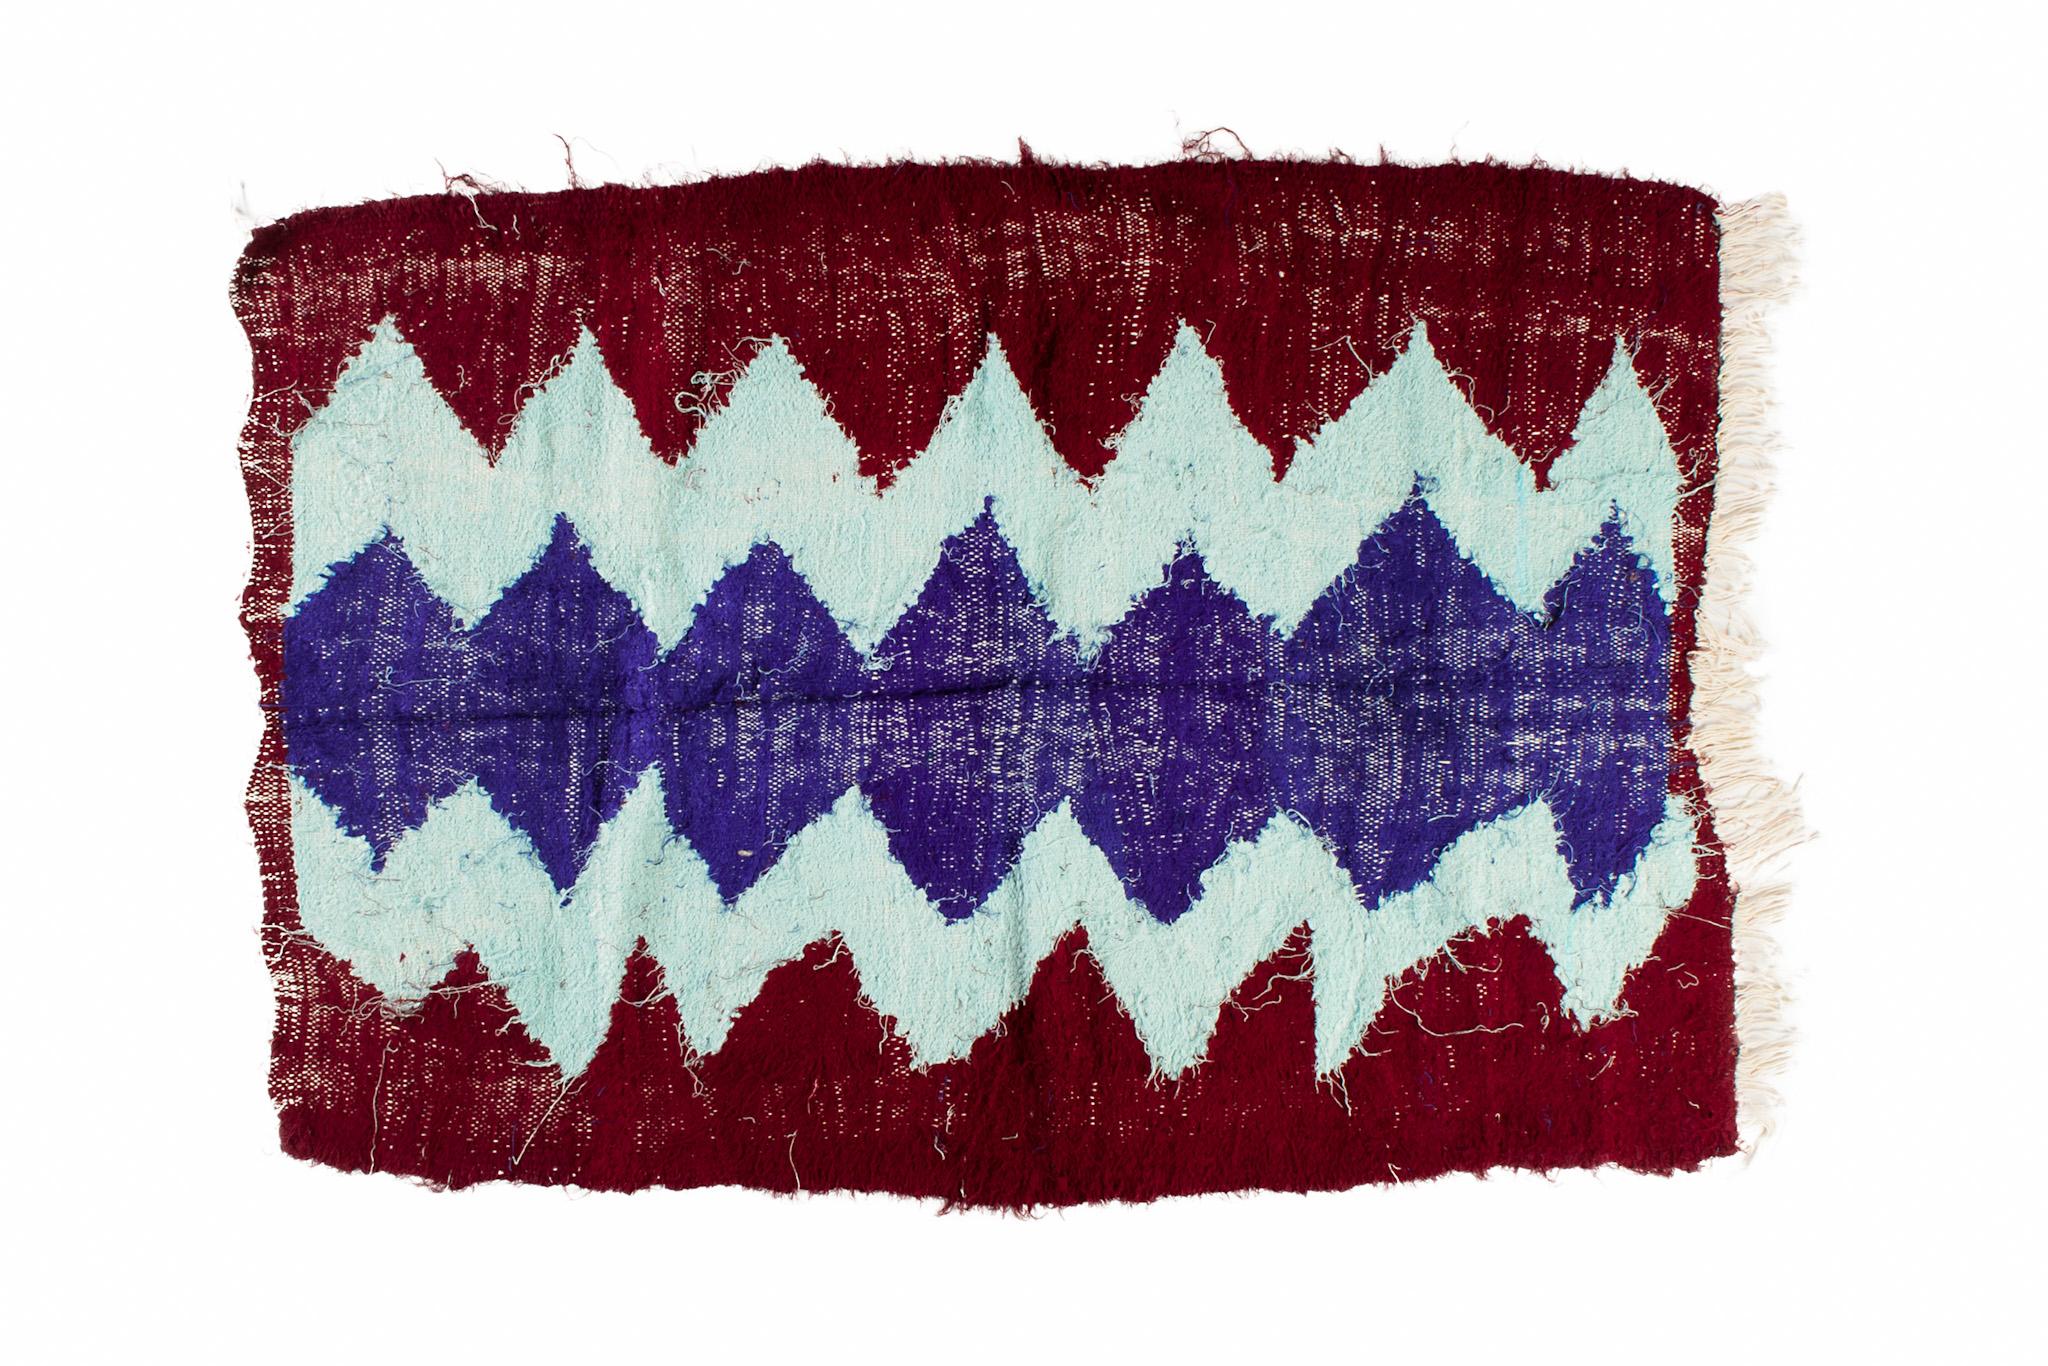 Boucharouite rugs are made of multicolored clothes pieces. This is the most authentic recycled rug you've ever seen! Measurements: 4.8'х3.3' / 149x101 cm.

Boucharouite – is the ancient manual technique of tying and interweaving the multicolored